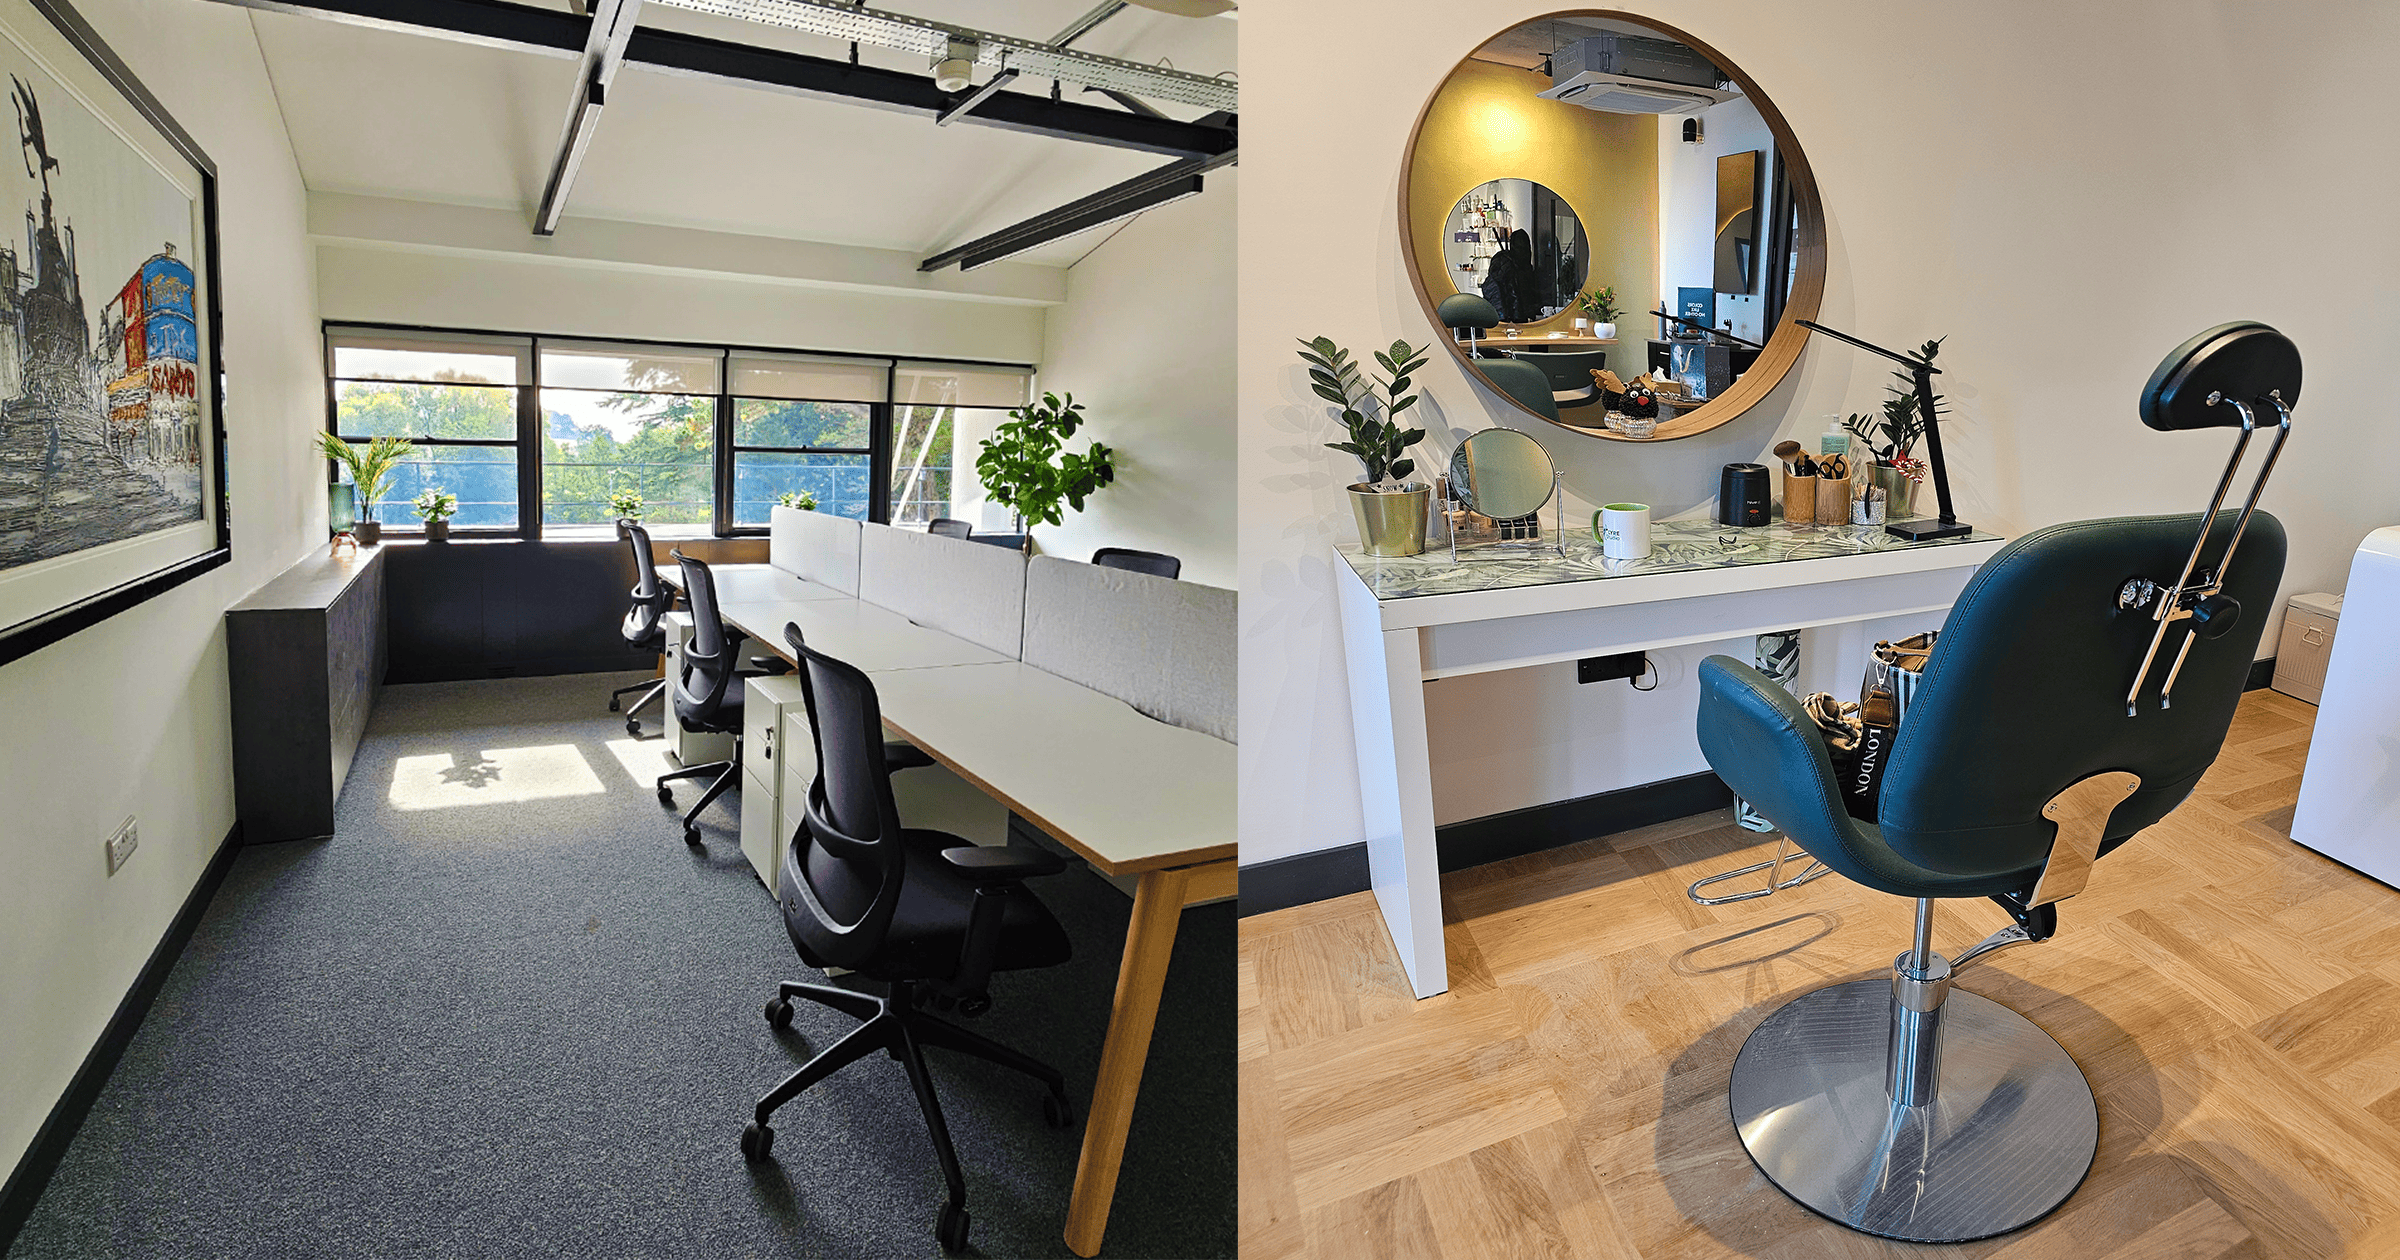 two images of previous mjs group projects at winslade park. On the left, a newly created office in Winslade House, on the Right an image of a salon chair from the Lyre Studio